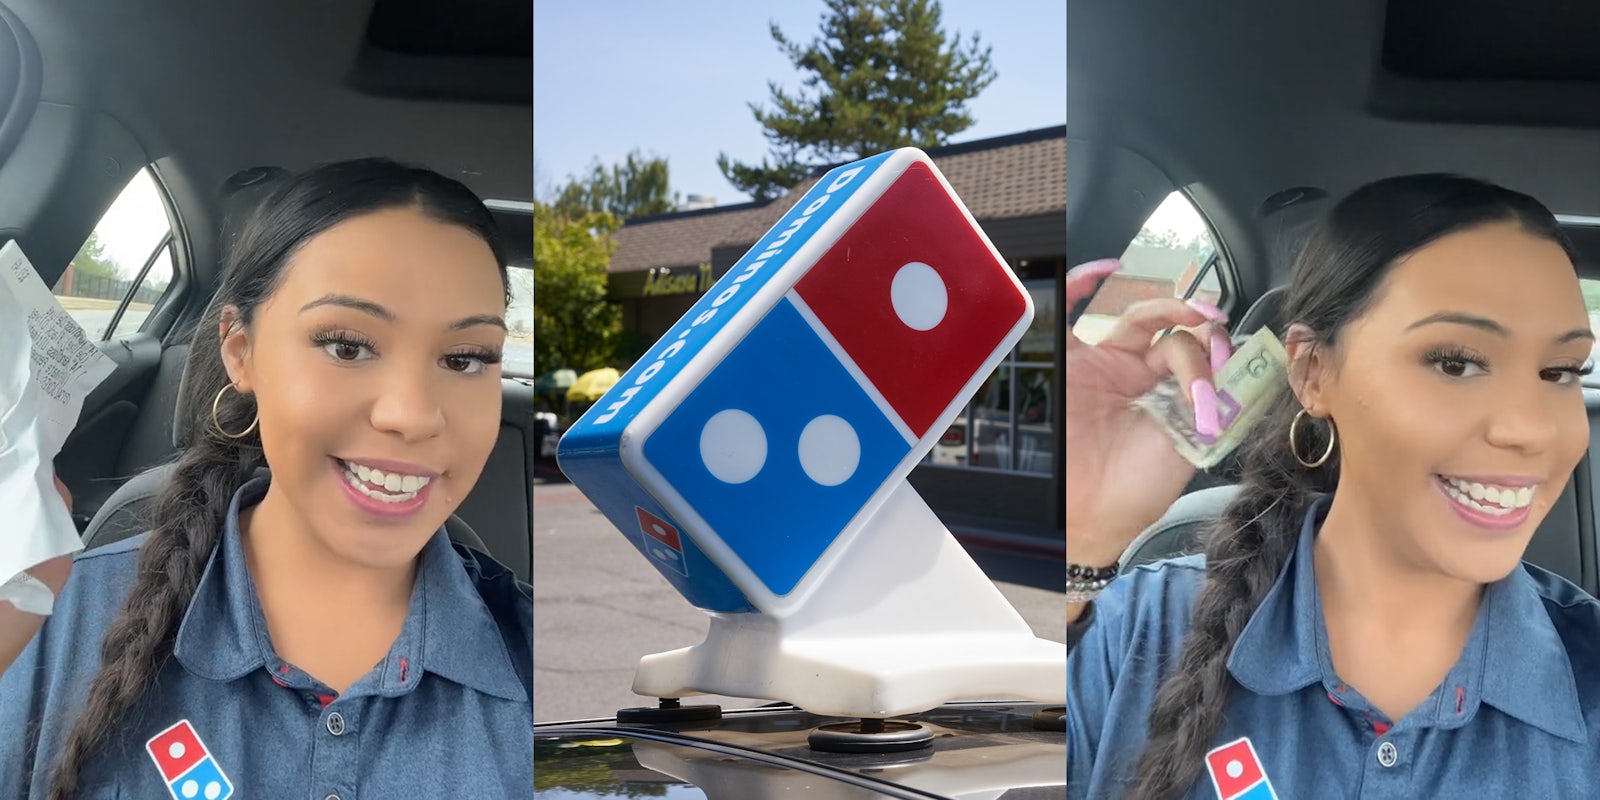 Domino's employee in car speaking holding receipt (l) Domino's delivery car with sign on top (c) Domino's employee in car speaking holding cash (r)